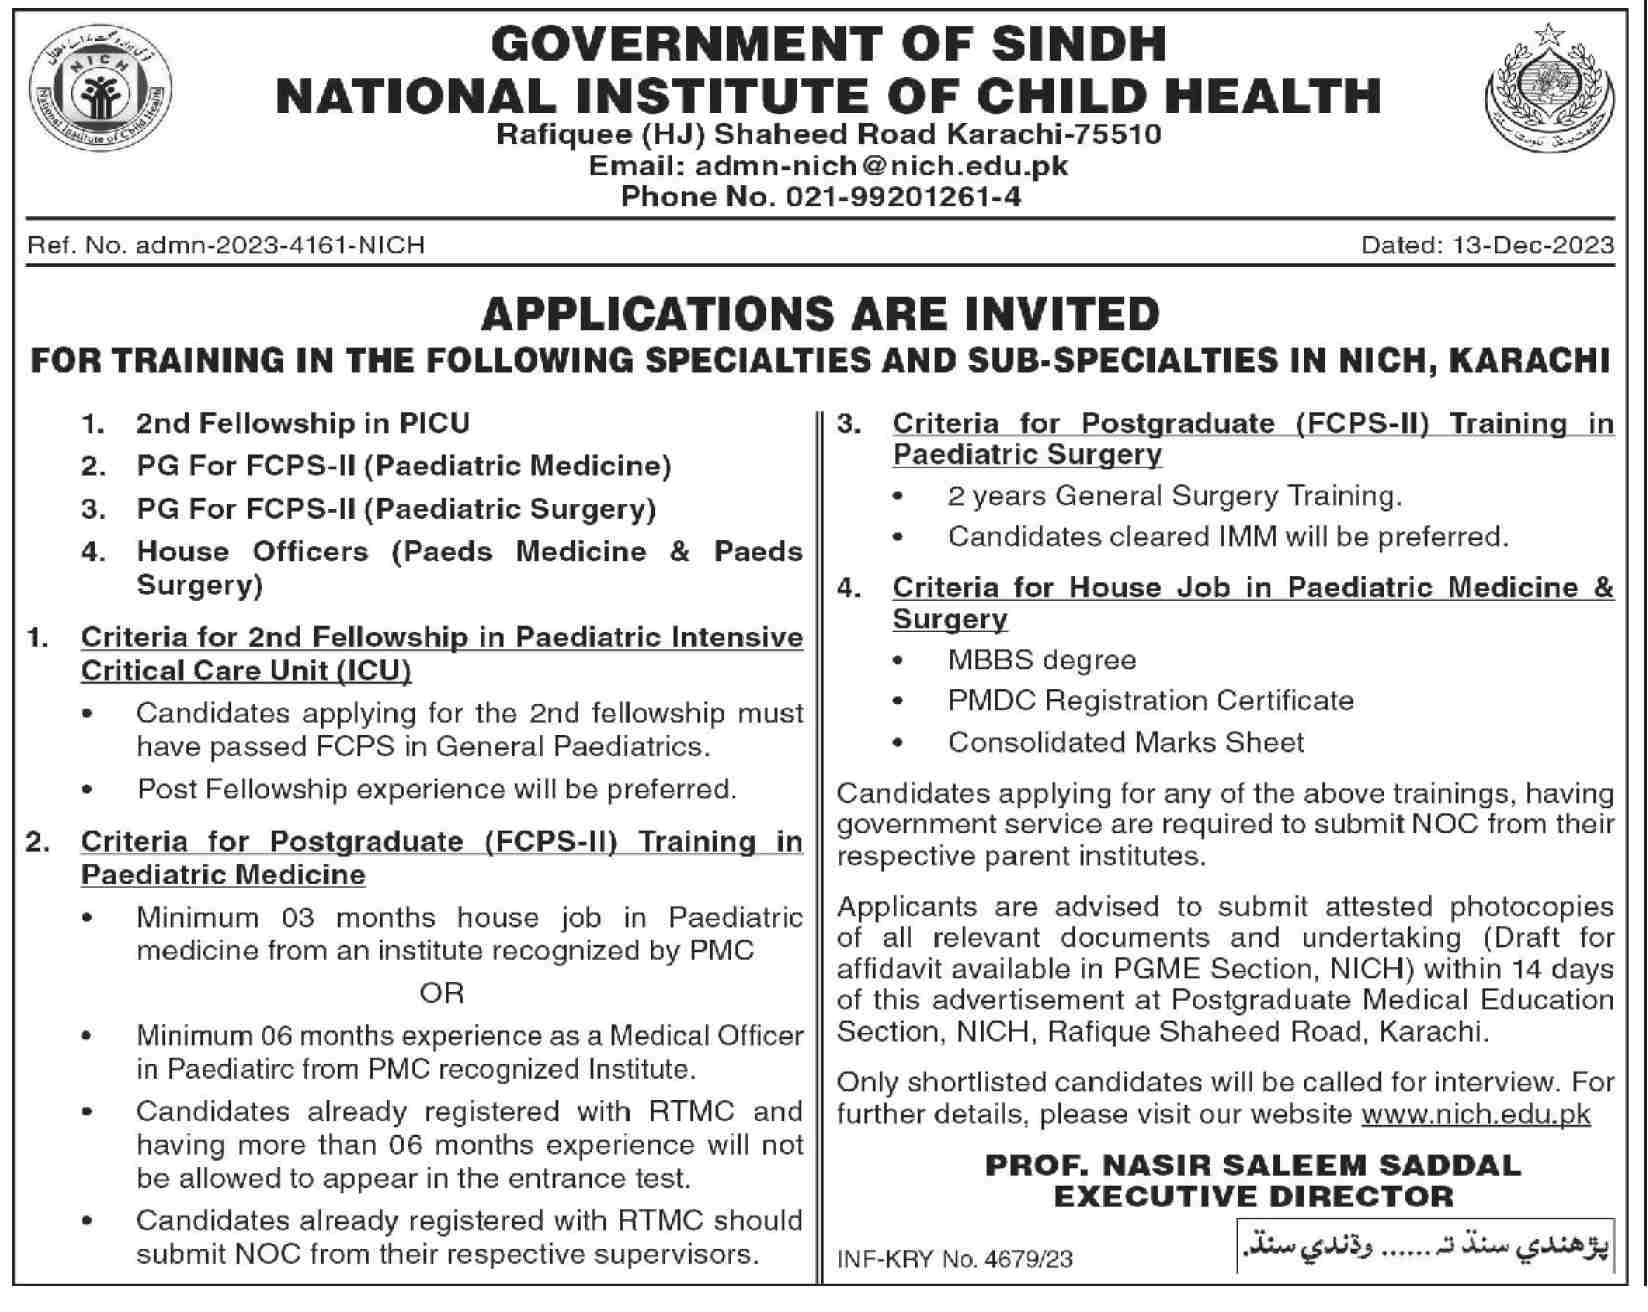 NICH National Institute of Child Health Karachi Applications For Training Specialties And Sub-Specialties